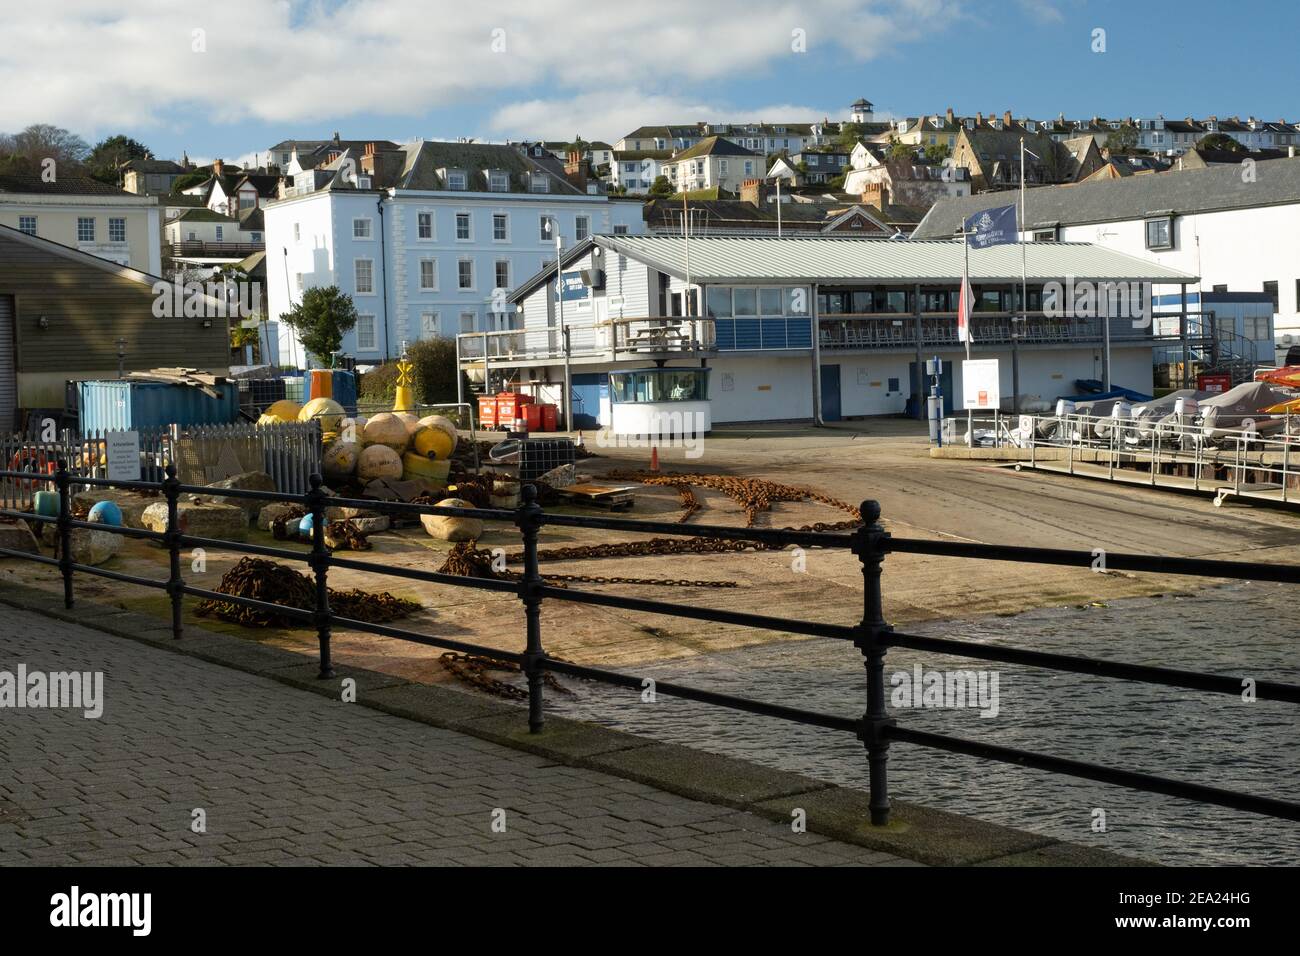 Falmouth Watersports Bar &Cafe across an expanse of slipway with chain, buoys and anchors. Closed due to Covid 19 pandemic lockdown. No people around. Stock Photo